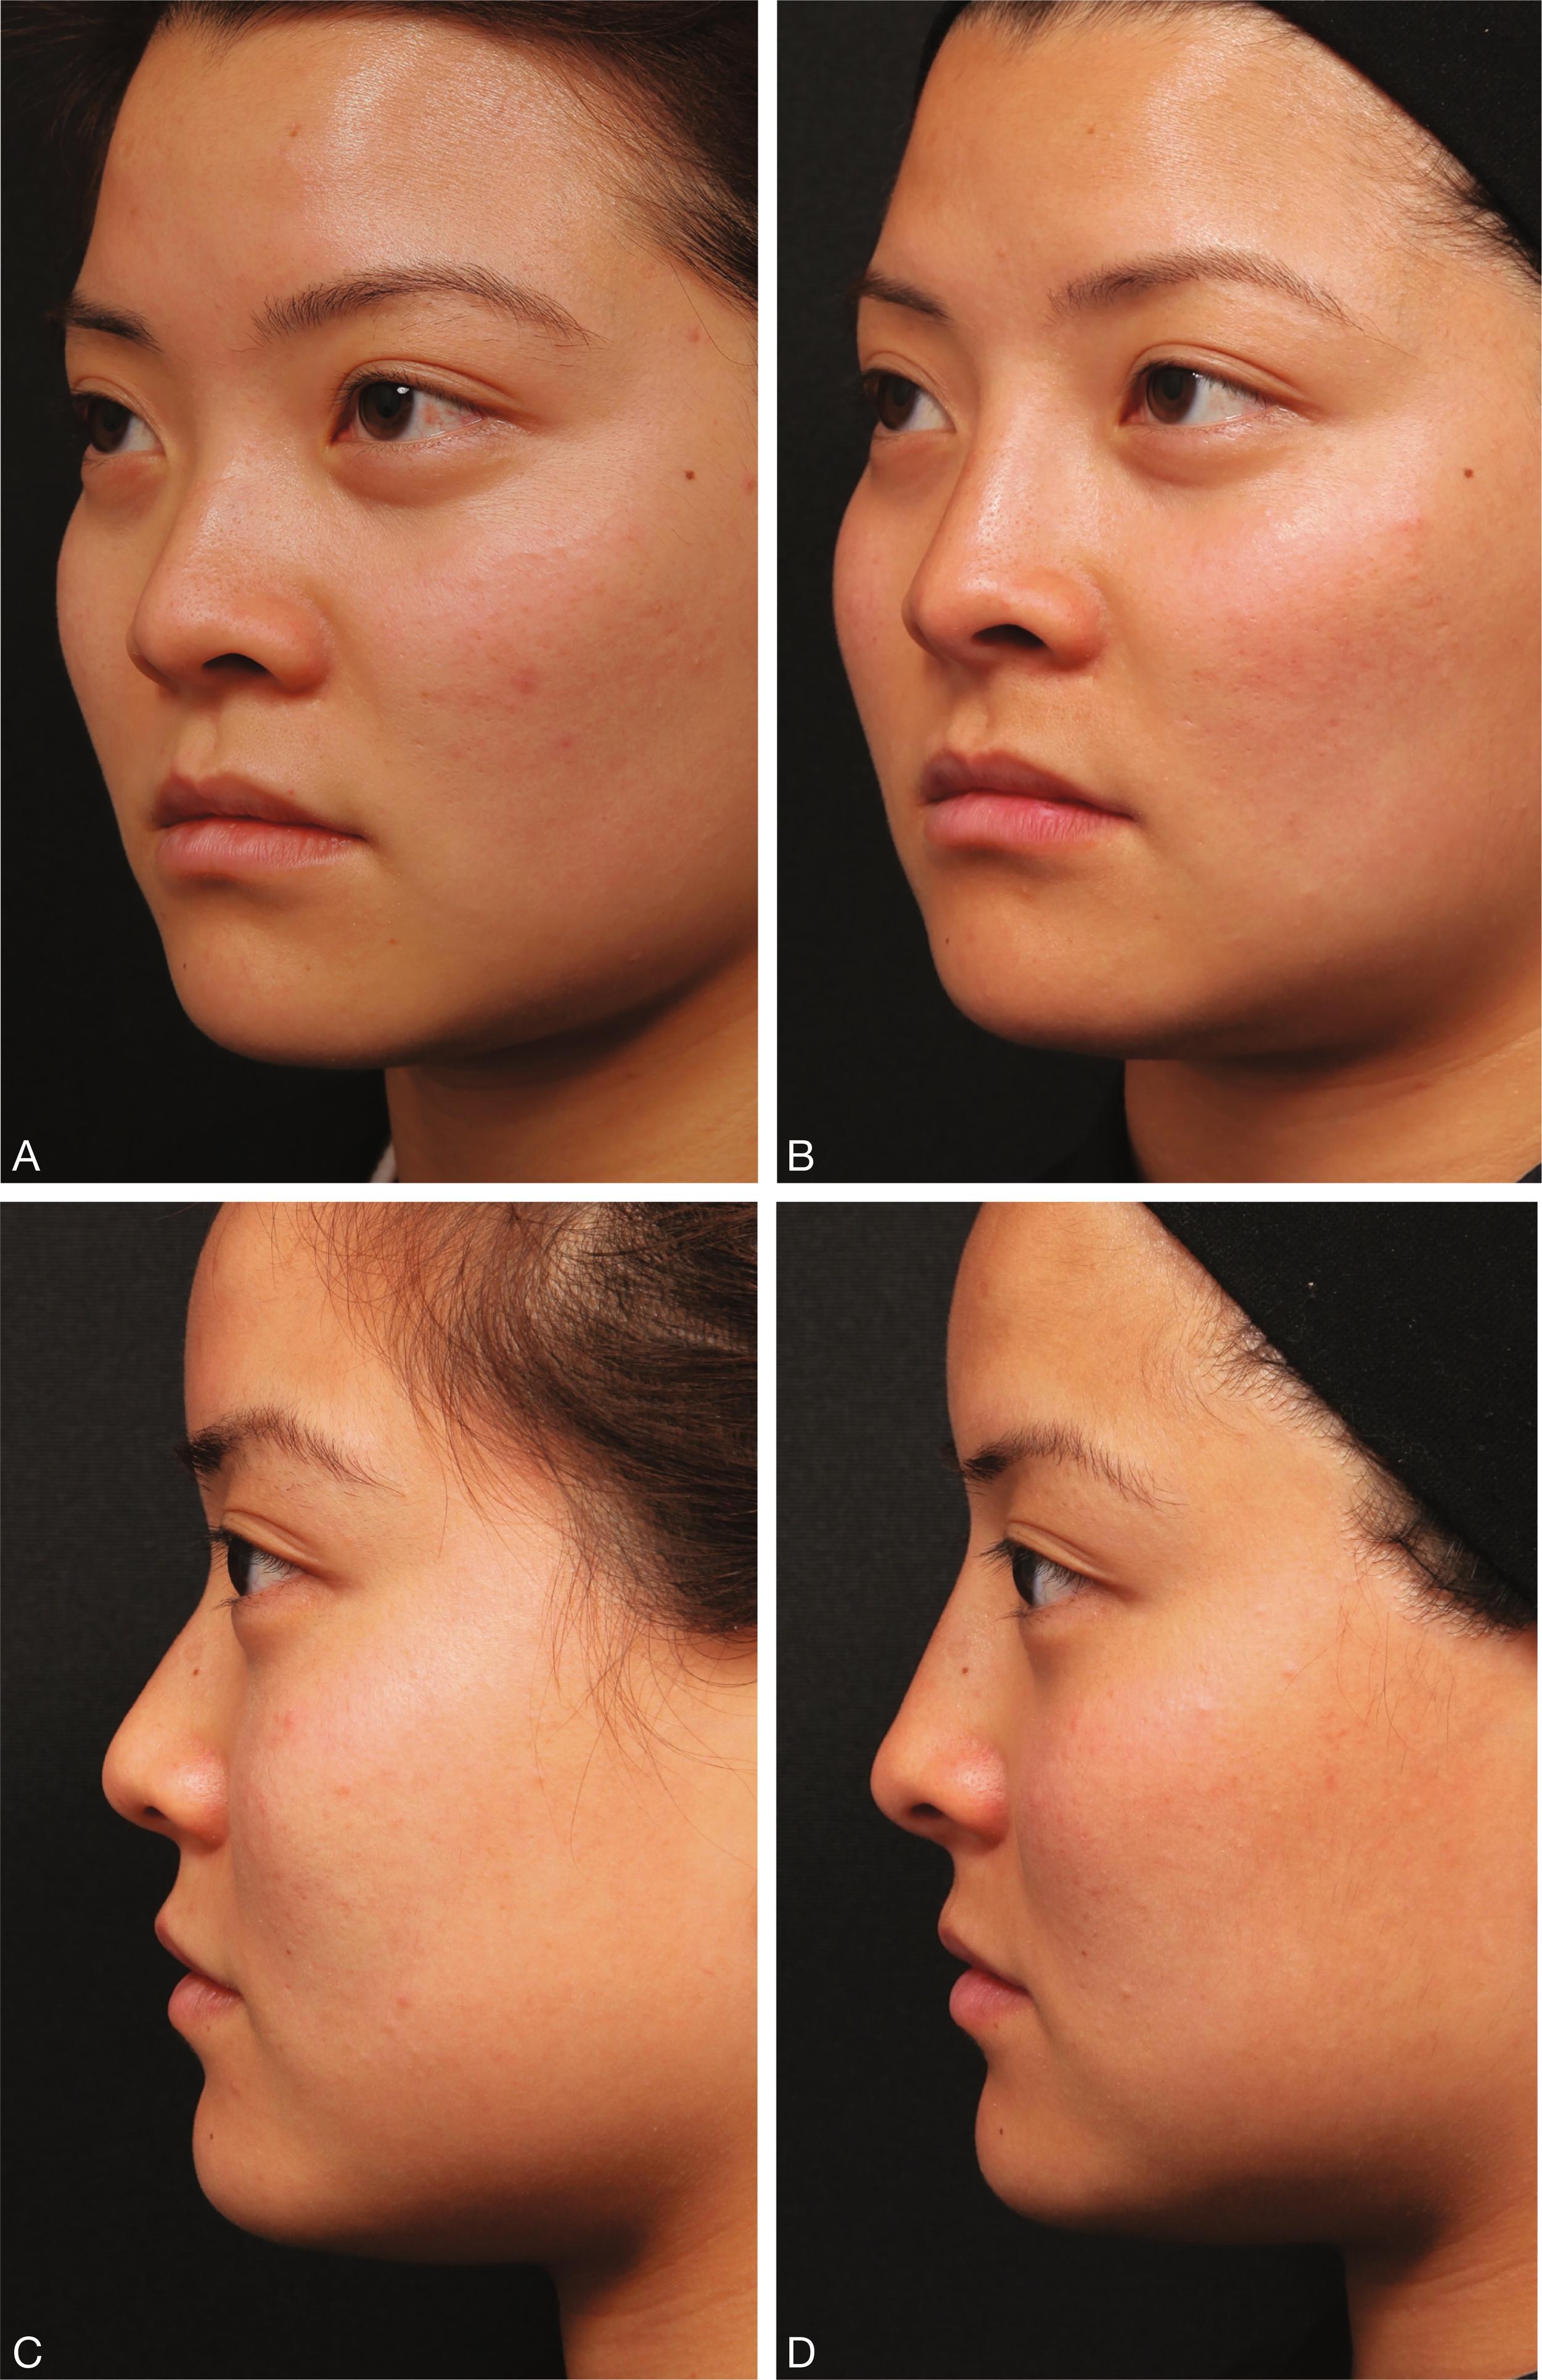 Fig. 22.5, (A–D) A young Asian female requested a higher nasal dorsum and more definition to her nose tip. A total of 1.5 mL of hyaluronic acid (HA) was used: 0.9 mL of the HA filler was placed at the nasal spine and columella to create a better projection of the nasal tip from the facial plane, whereas 0.6 mL of the same HA filler is placed on the nasal dorsum and nasal tip to create a higher nasal bridge, better definition of the nasal tip, and elongation of the nasal profile.